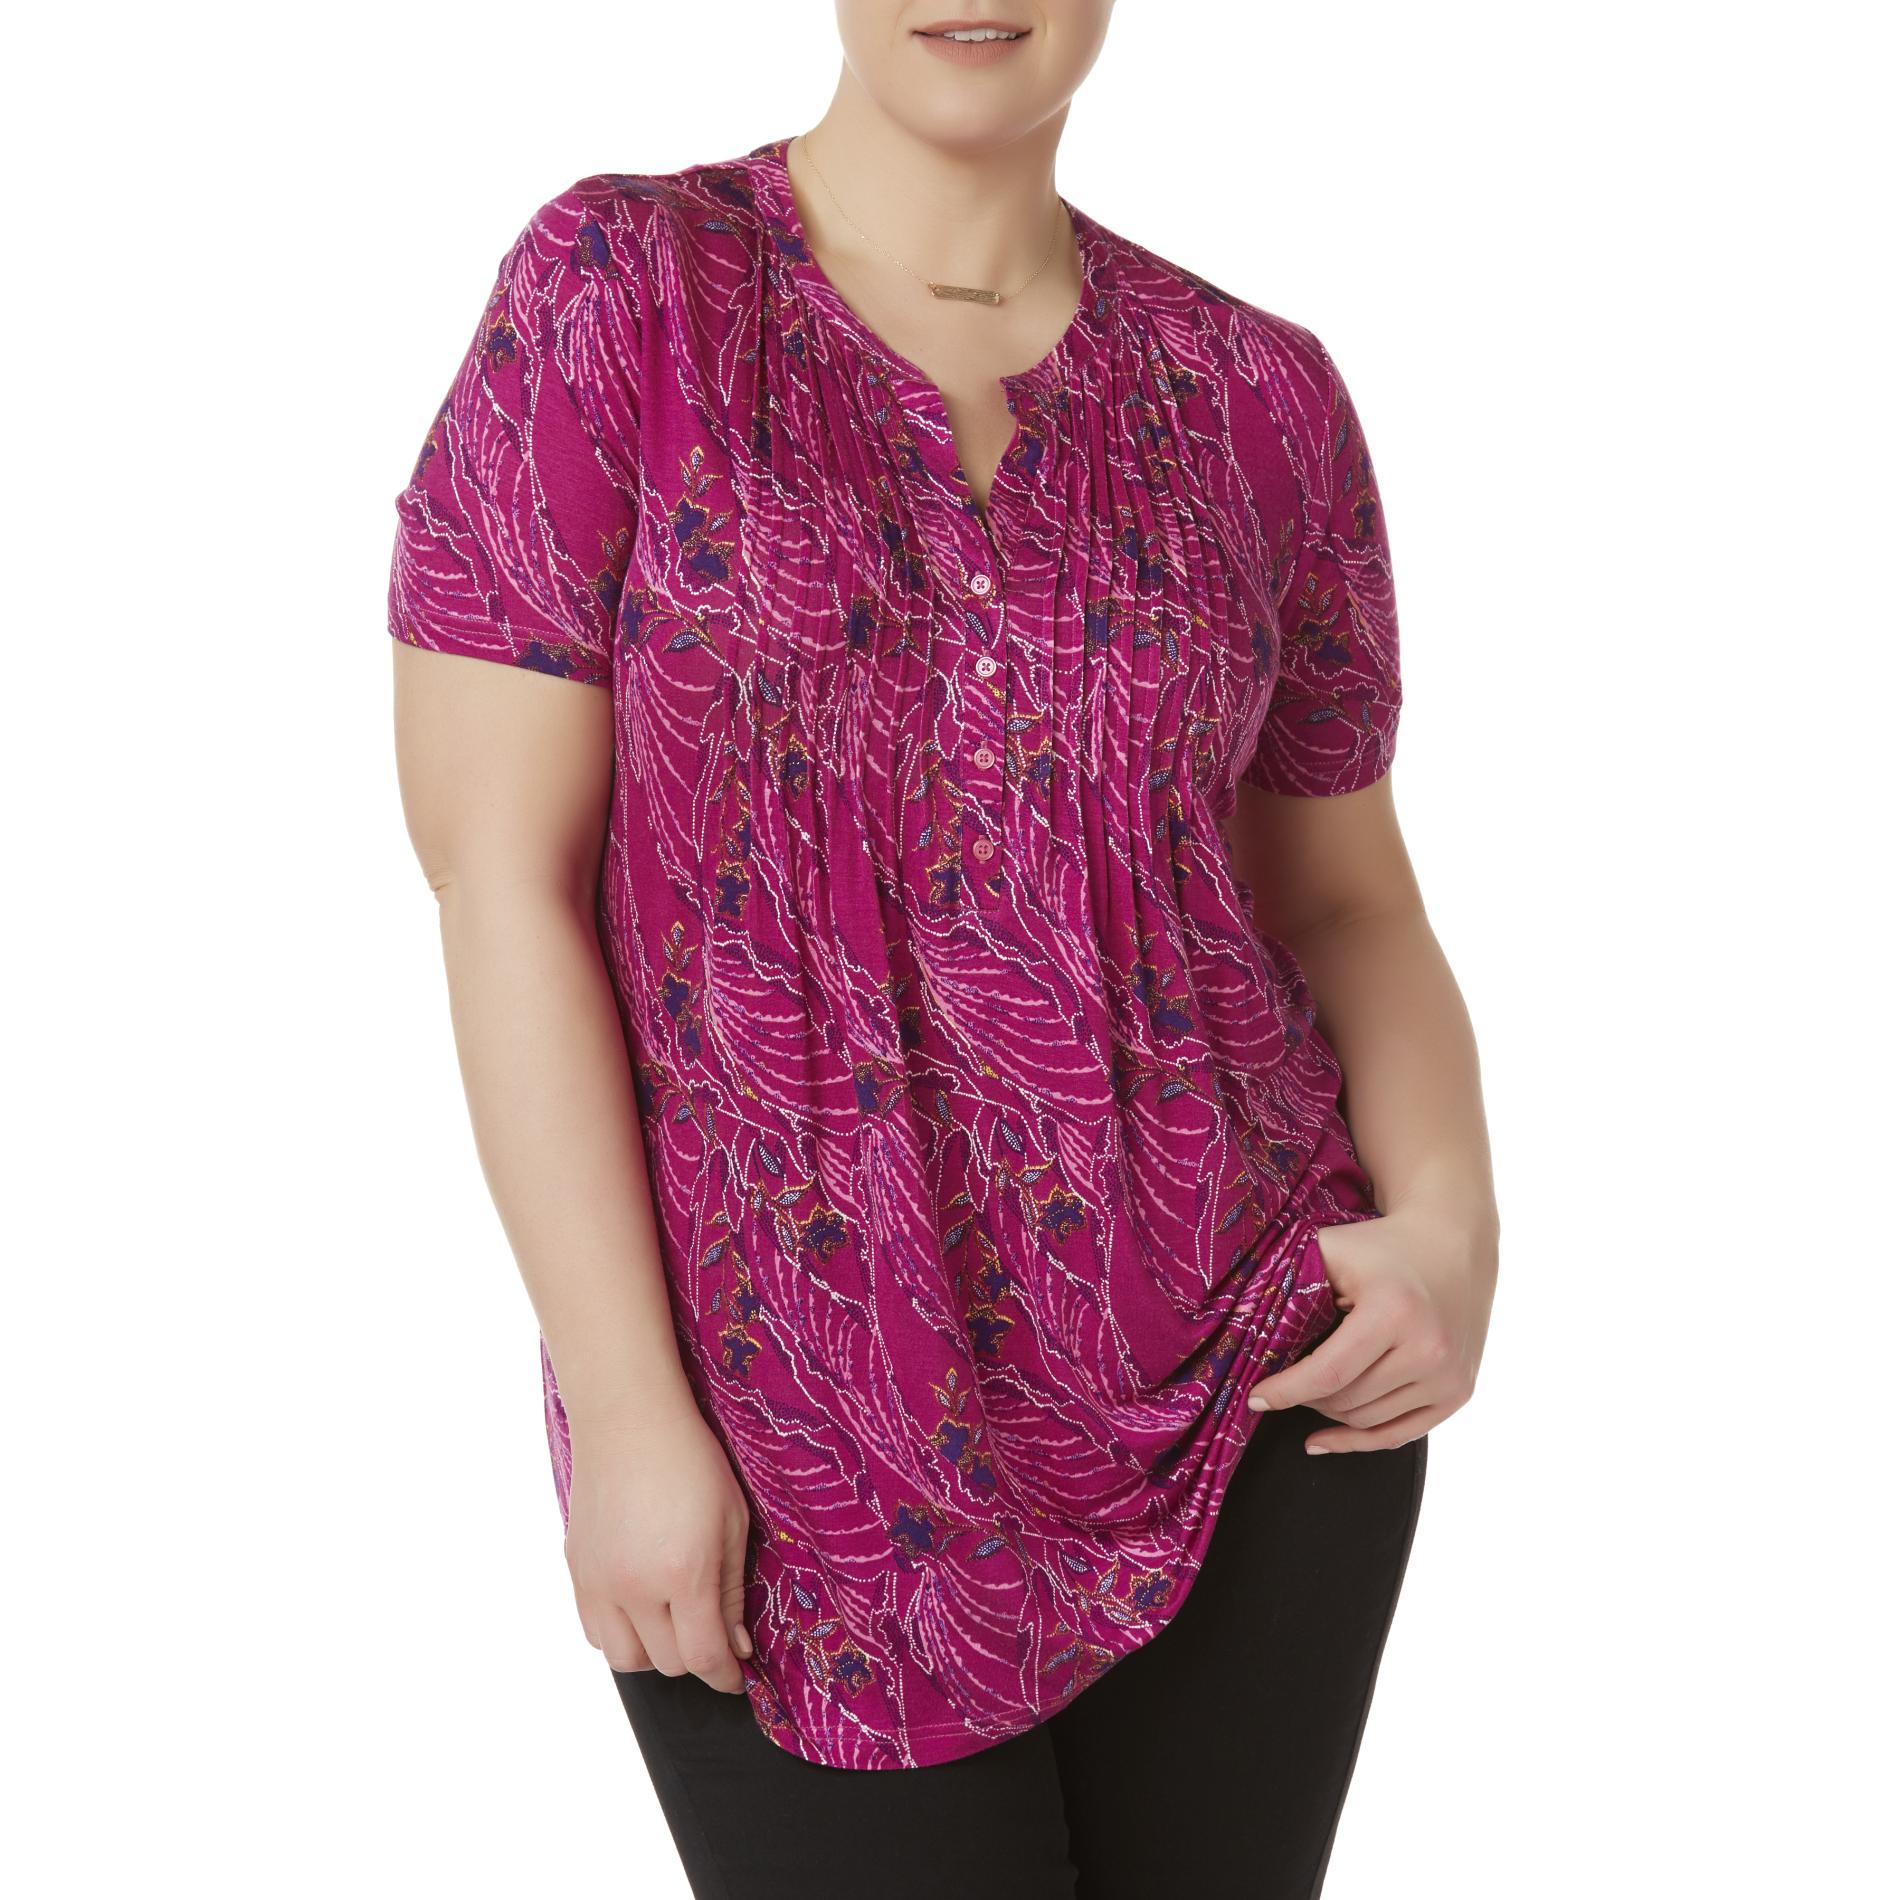 Simply Emma Women's Plus Pintuck Top - Floral